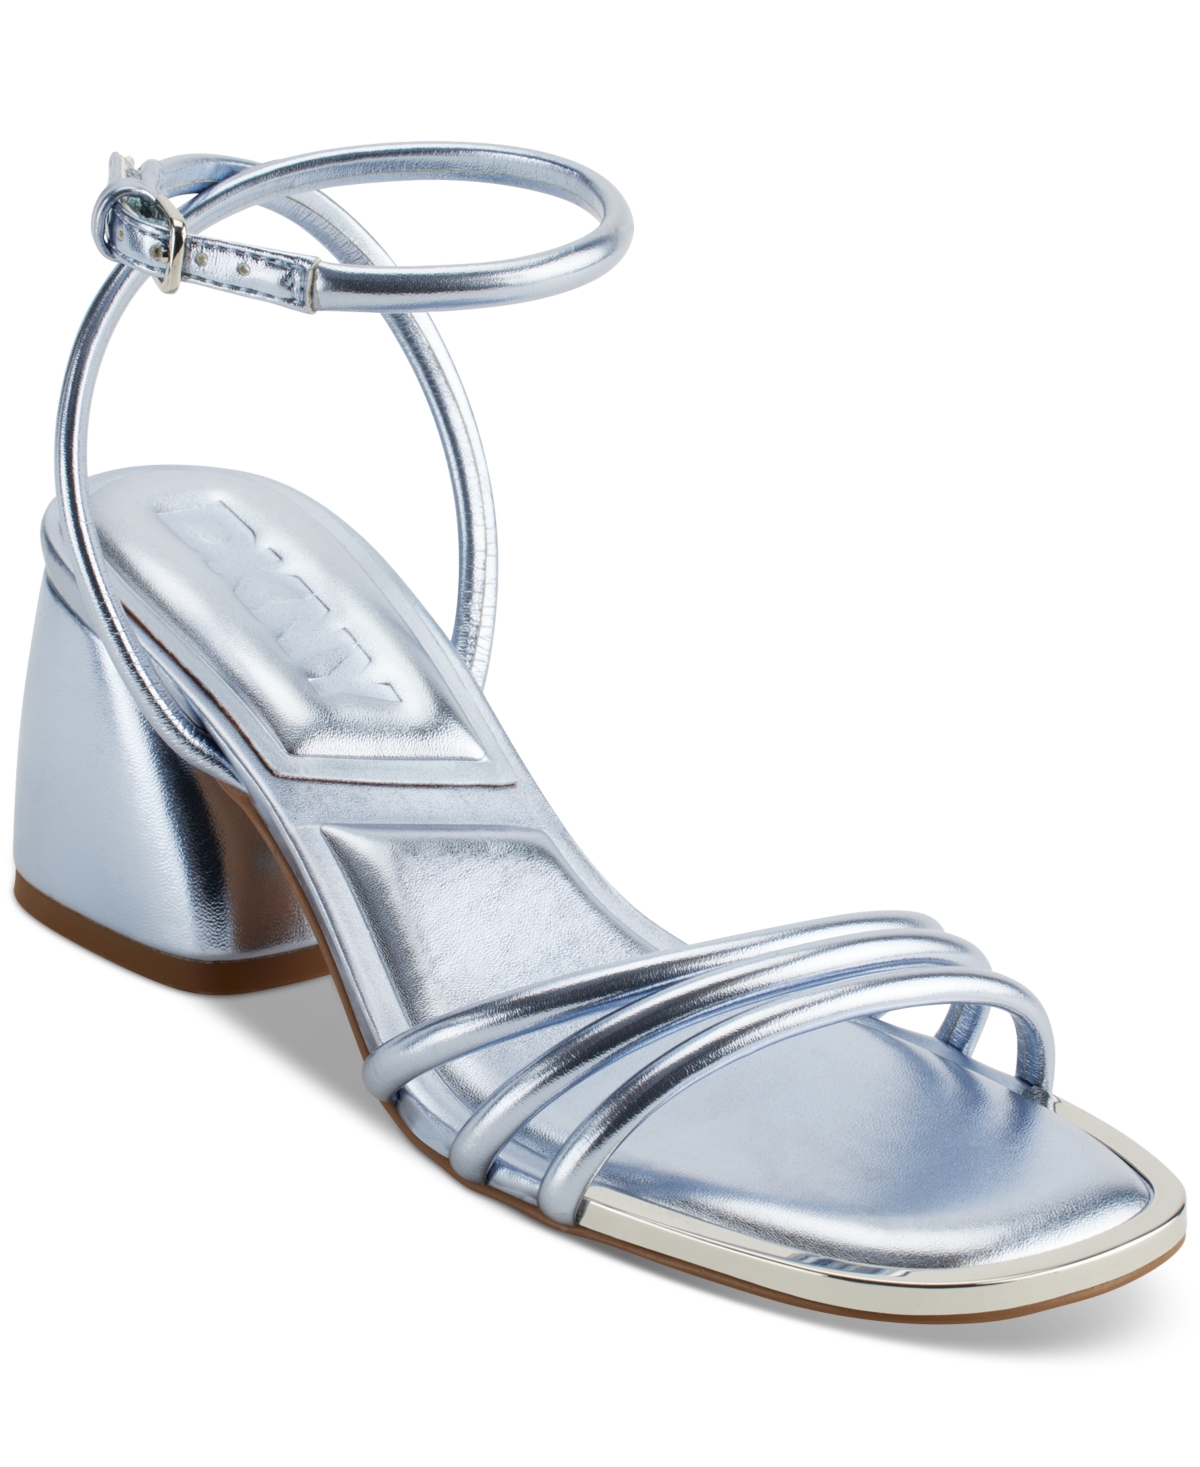 Women's Trixie Ankle-Strap Block-Heel Sandals - Light Taupe